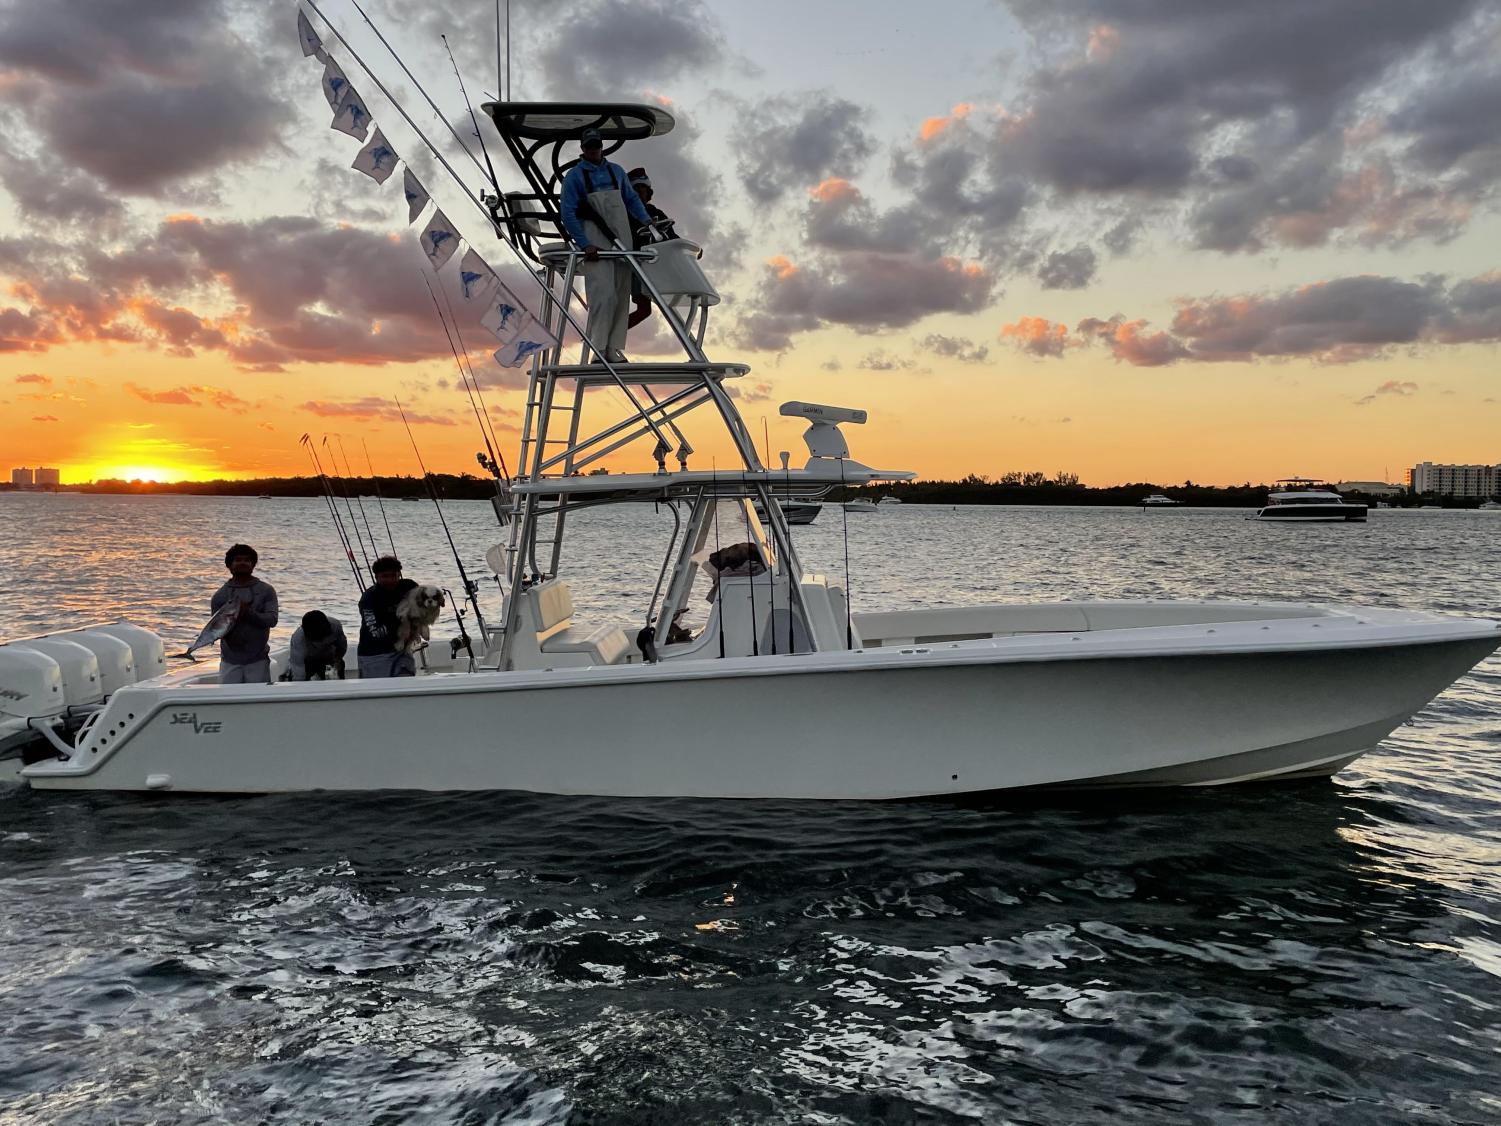 Clayton Younger ’23 (top) going out on his fishing boat in the early morning.